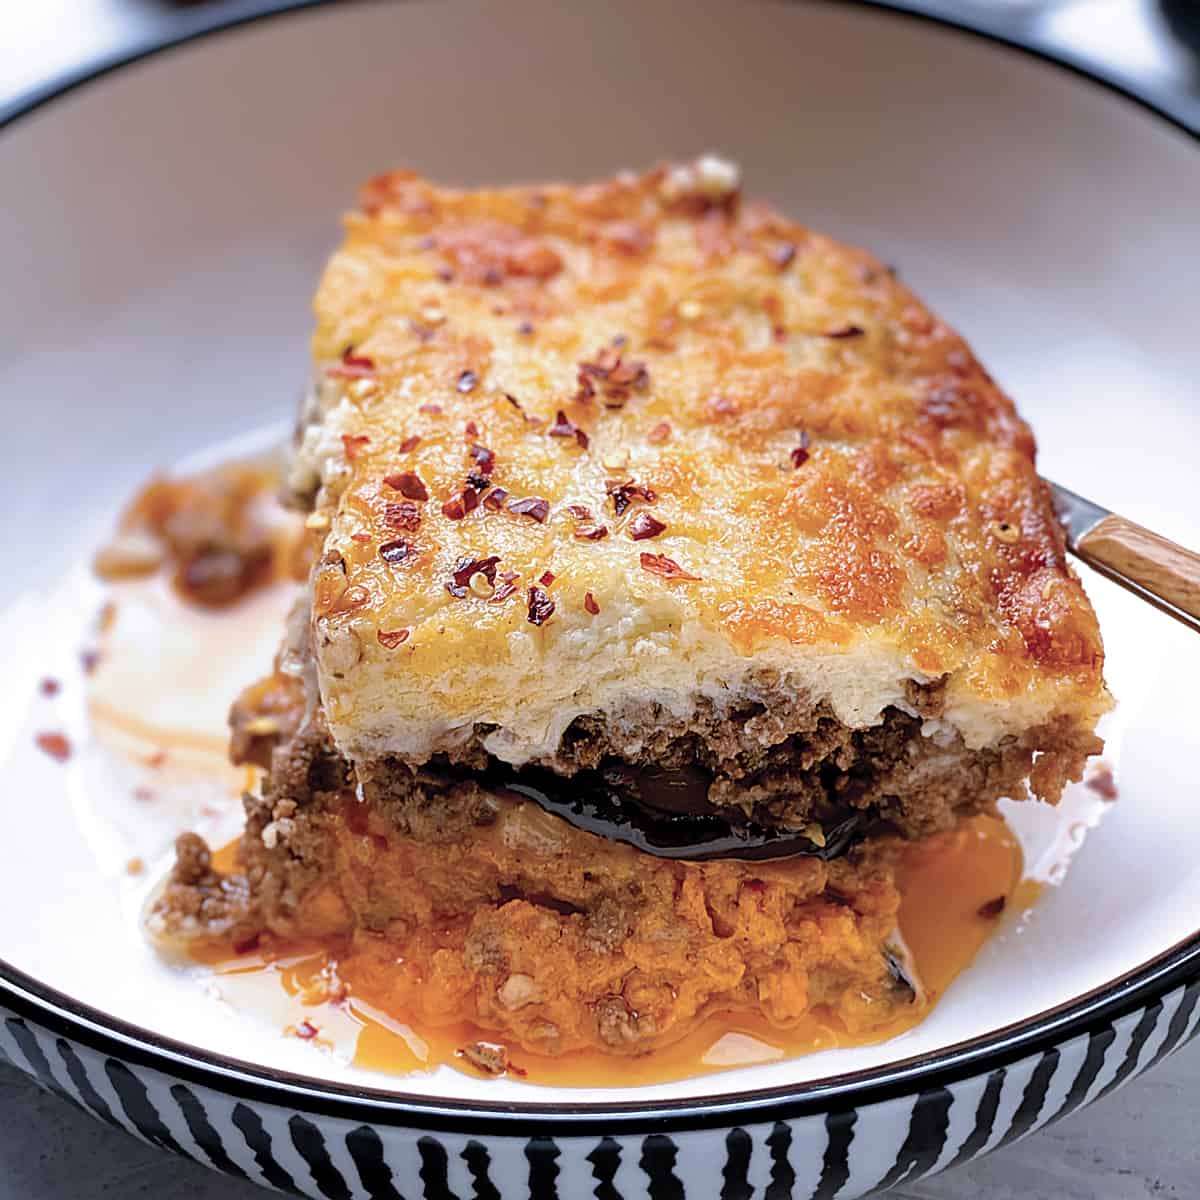 A plate with a piece of sweet potato moussaka.